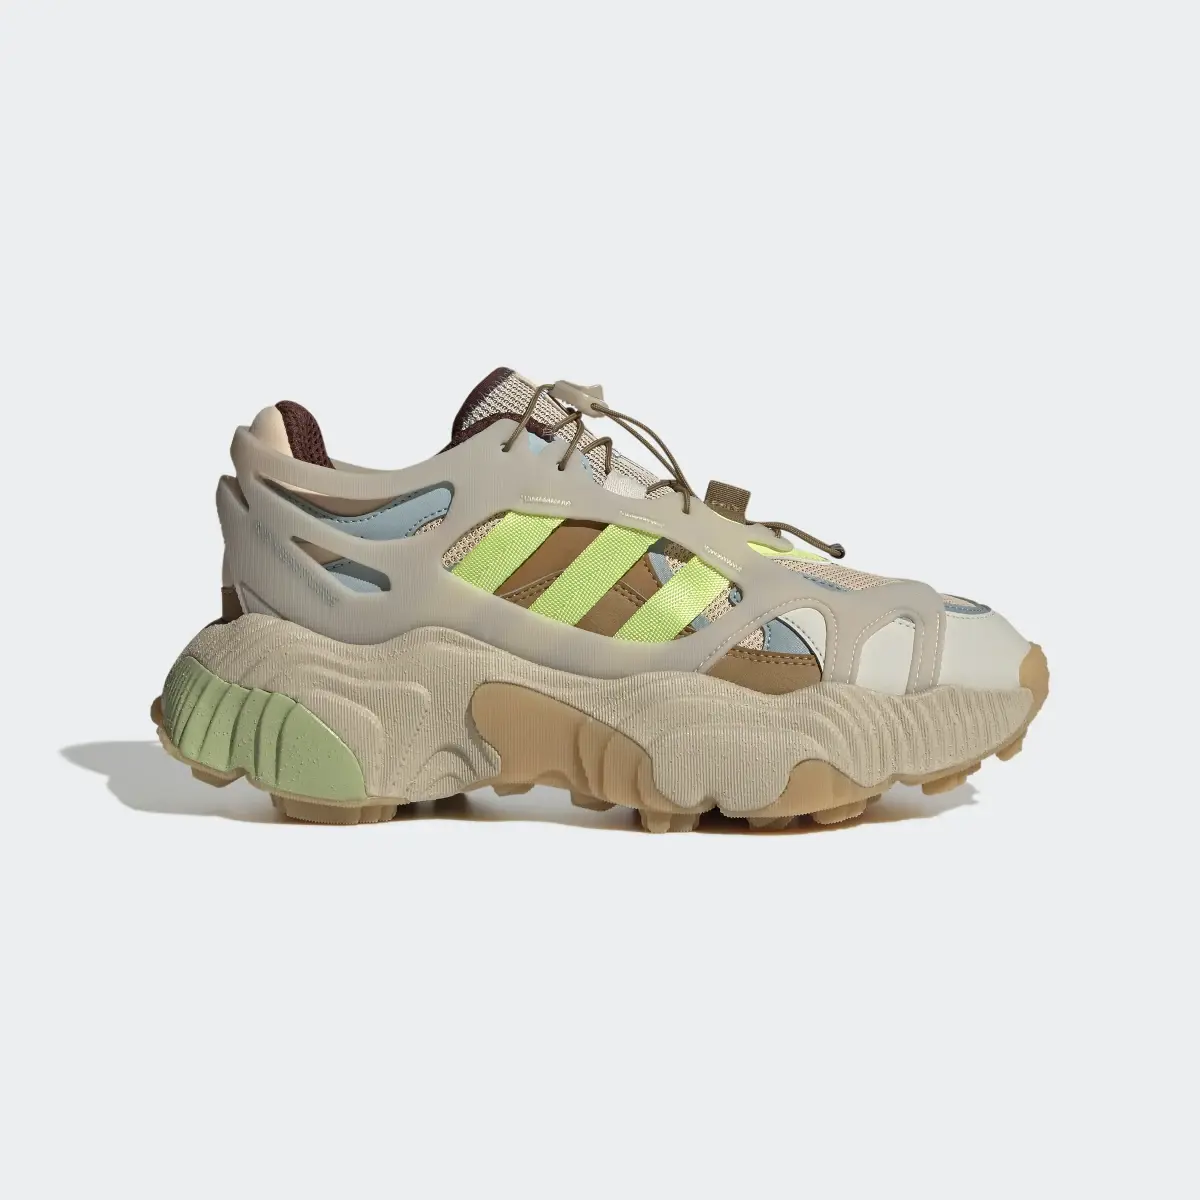 Adidas Roverend Adventure Shoes. 2